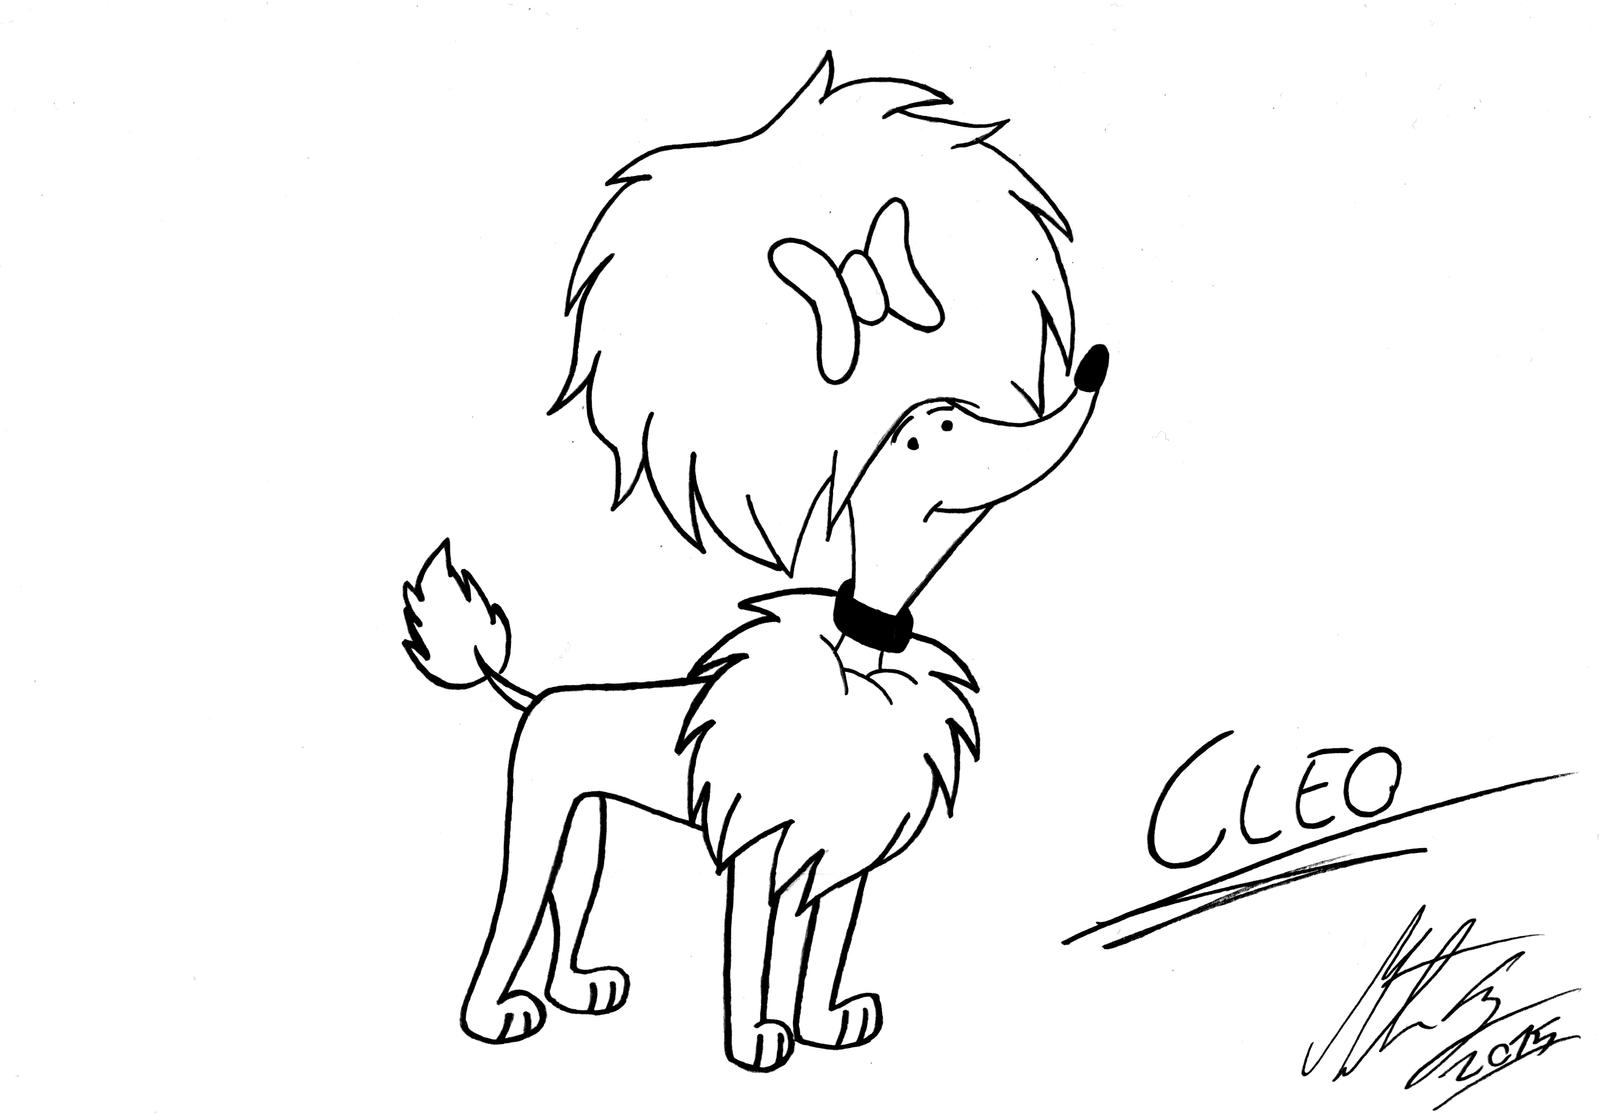 Clifford the Big Red Dog Cleo by MortenEng21 on DeviantArt